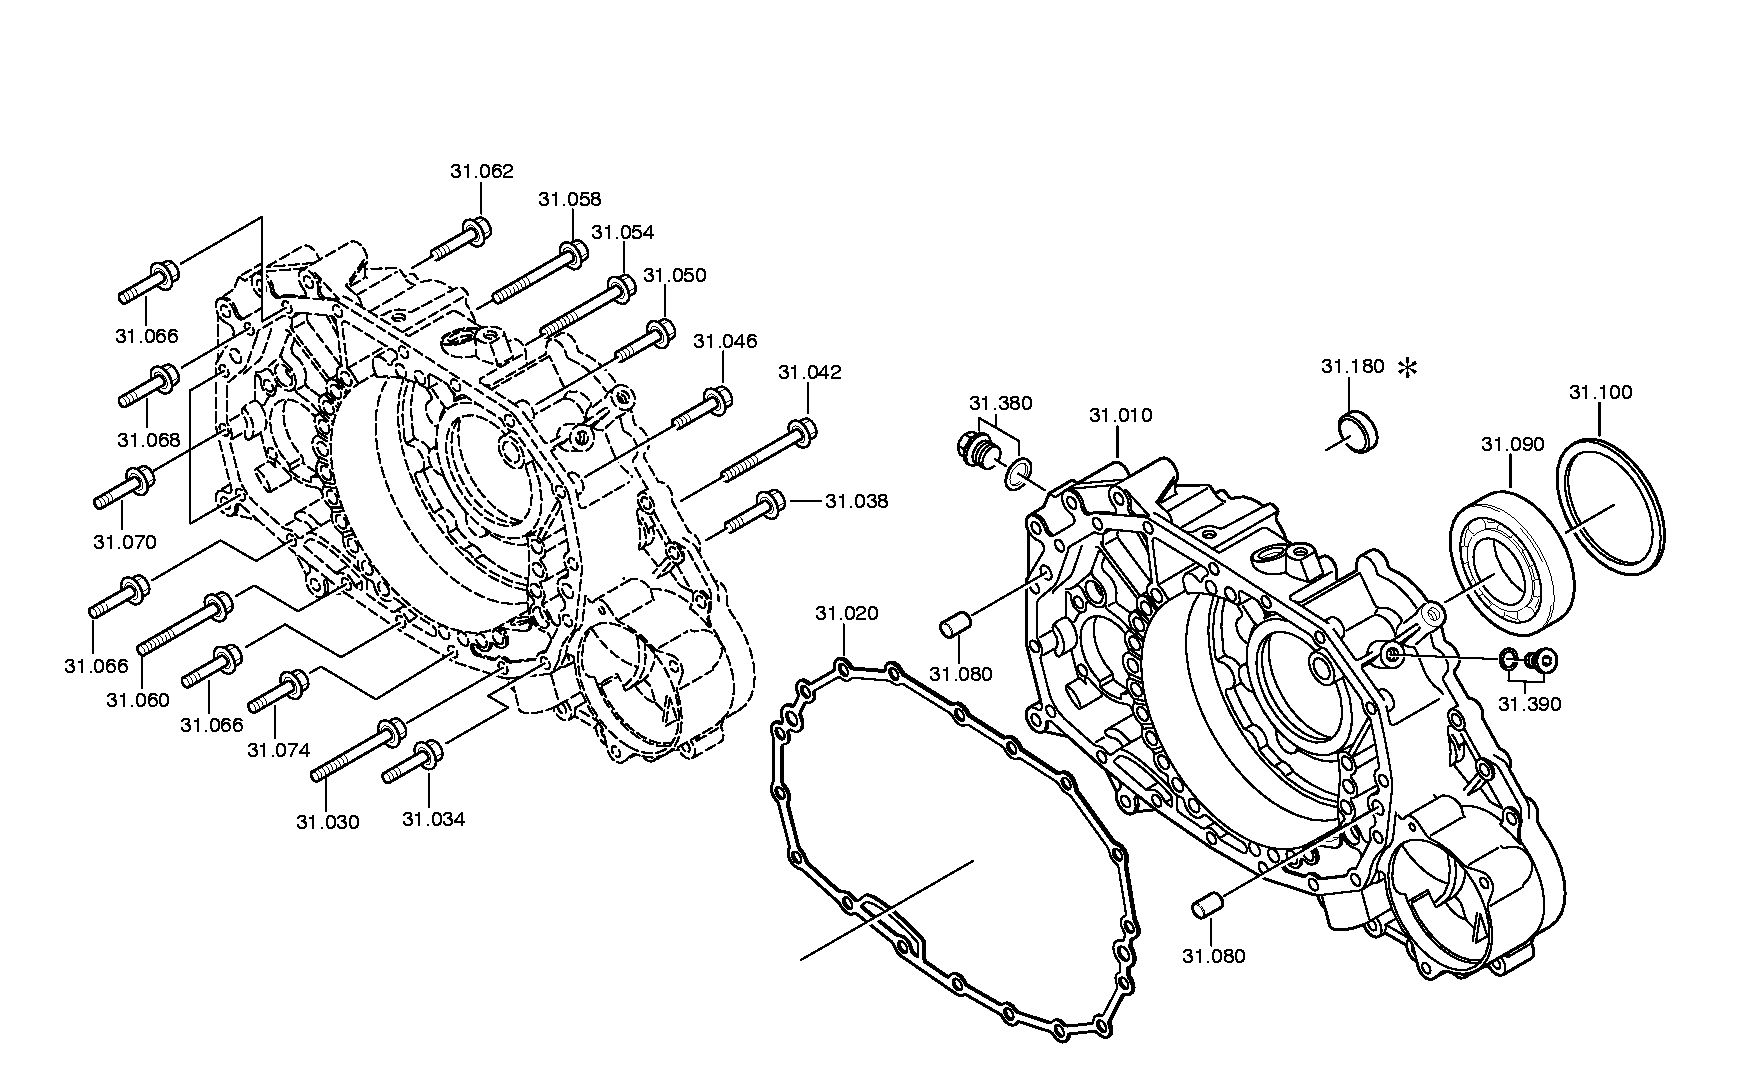 drawing for DAF 1375468 - HOUSING (figure 1)